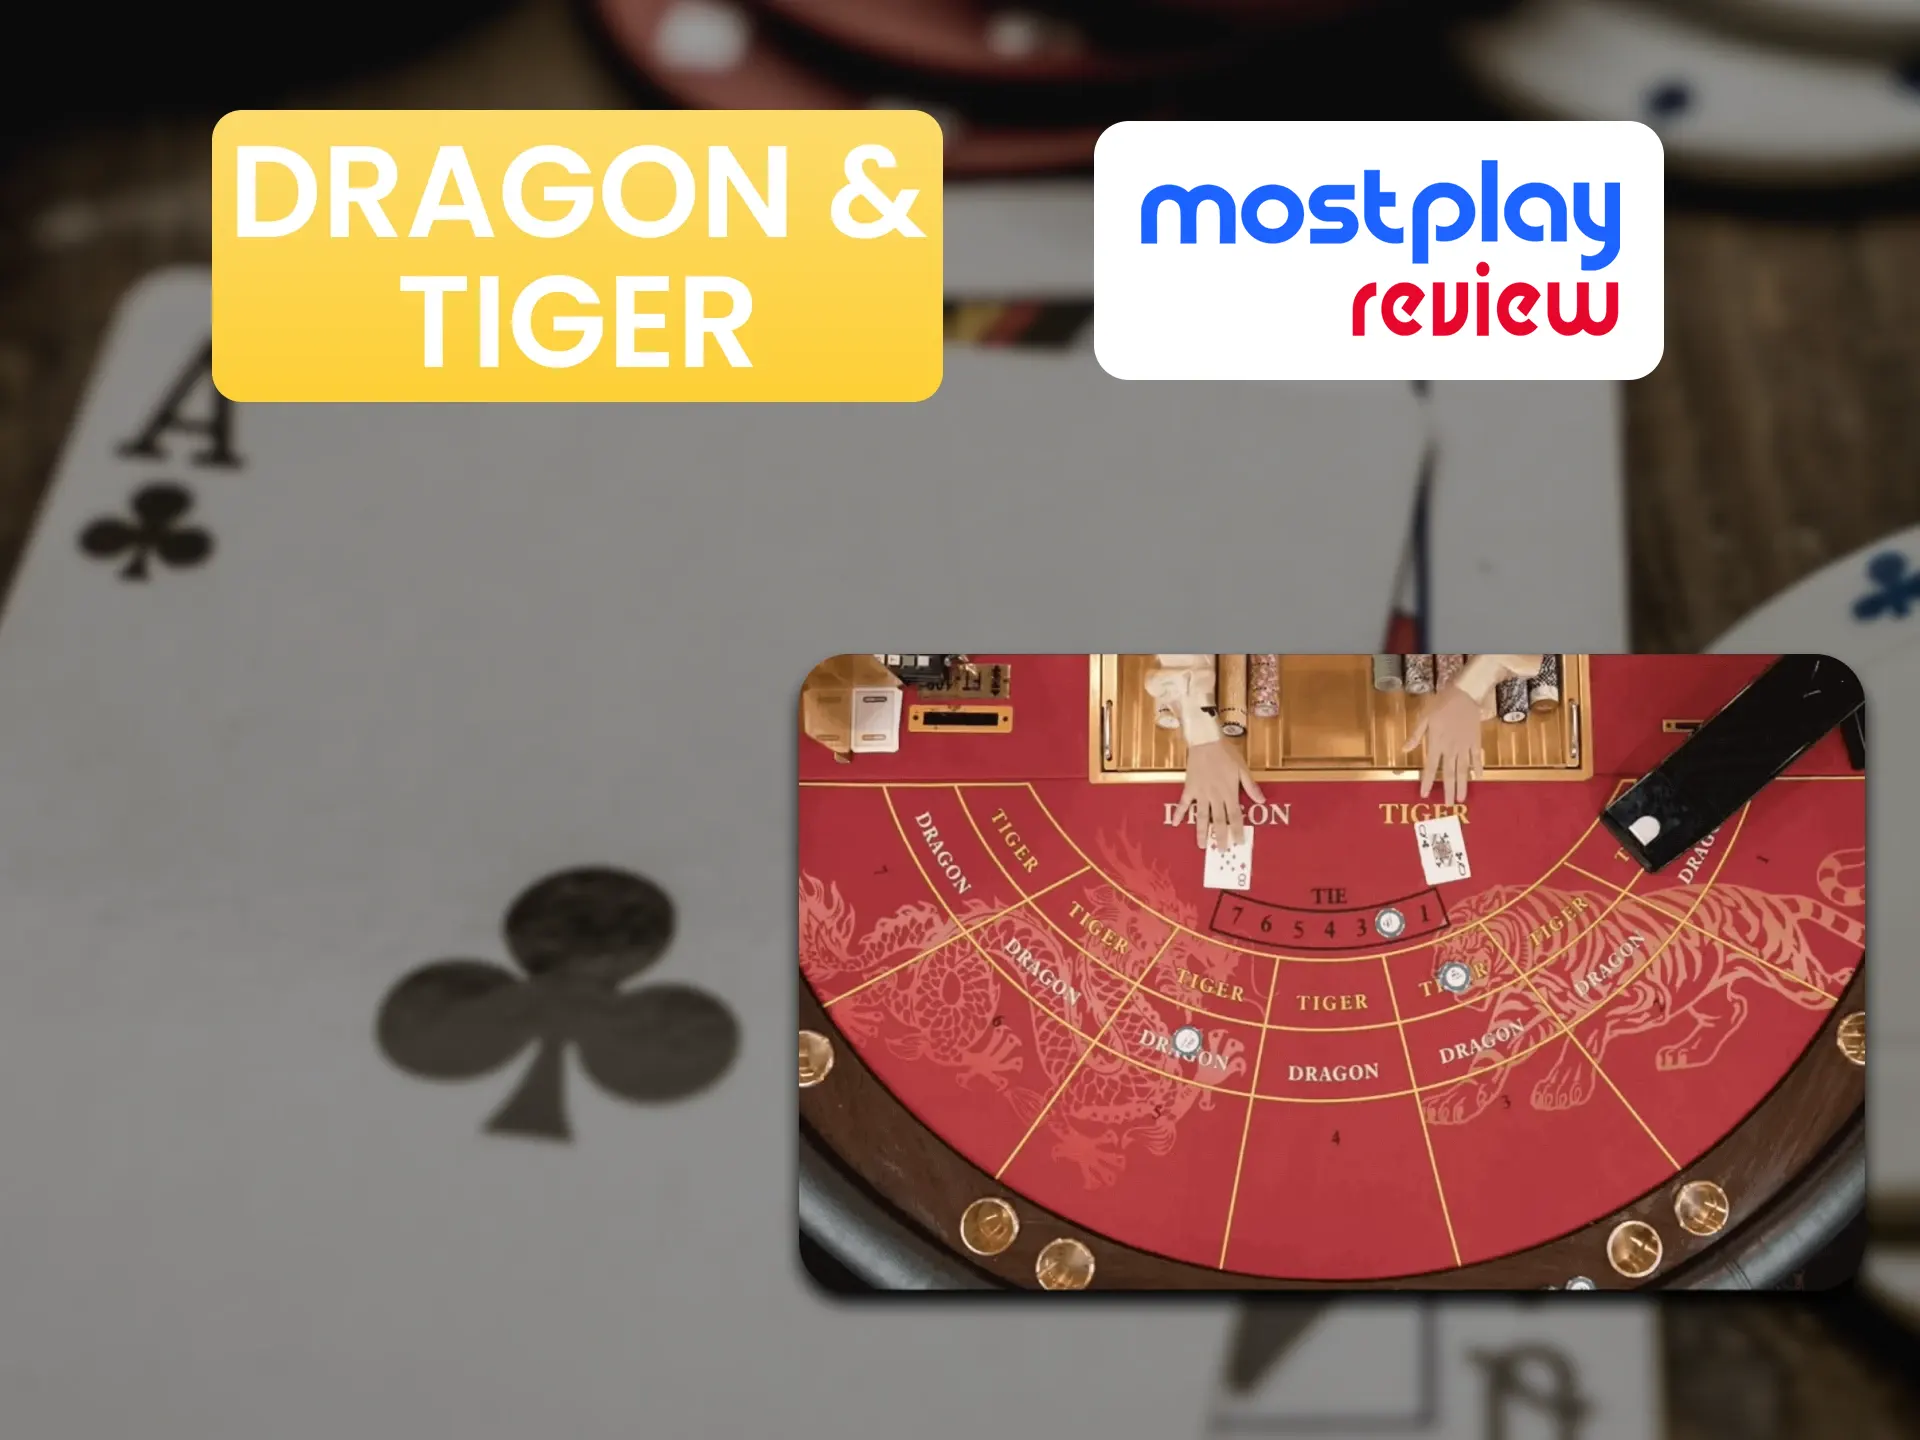 Choose Dragon and Tiger for casino games at Mostplay.